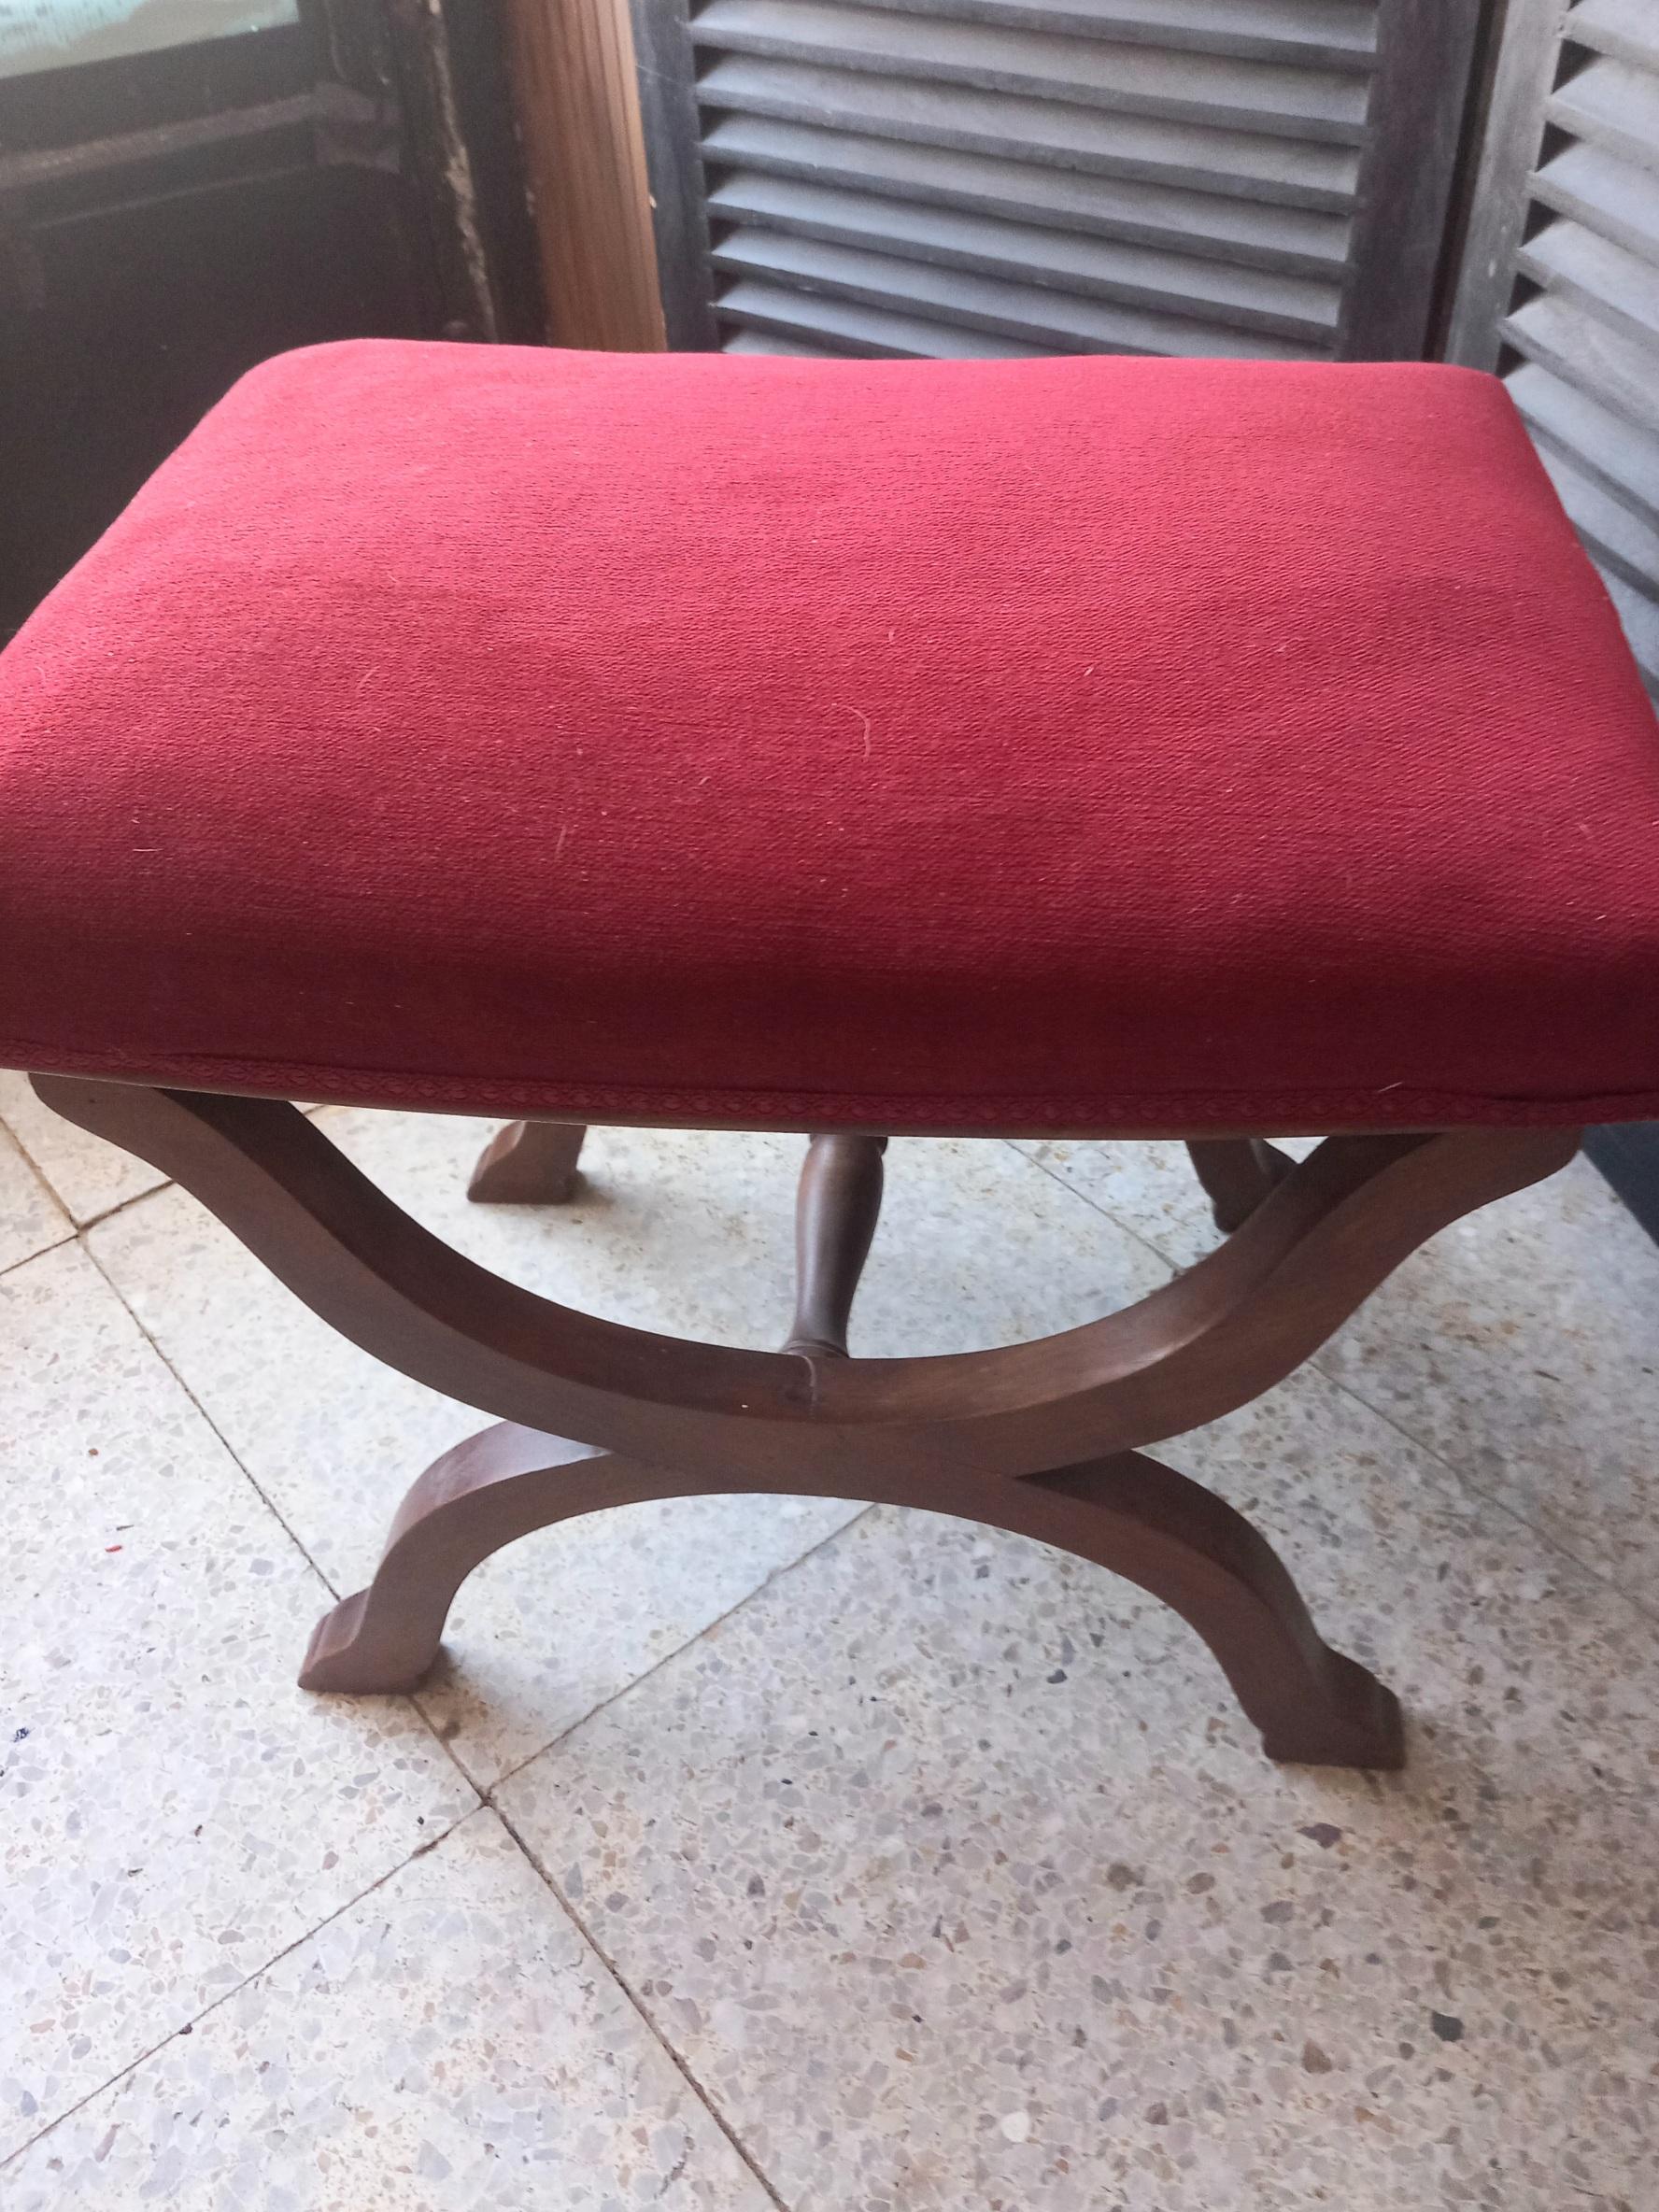 19th or early 20th Century
Beautiful antique walnut and maroon velvet stools or footstools

 They are in excellent condition, well cared for. no dirt or damage
They are two very simple but elegant pieces, perfect for the living room, bedroom or even